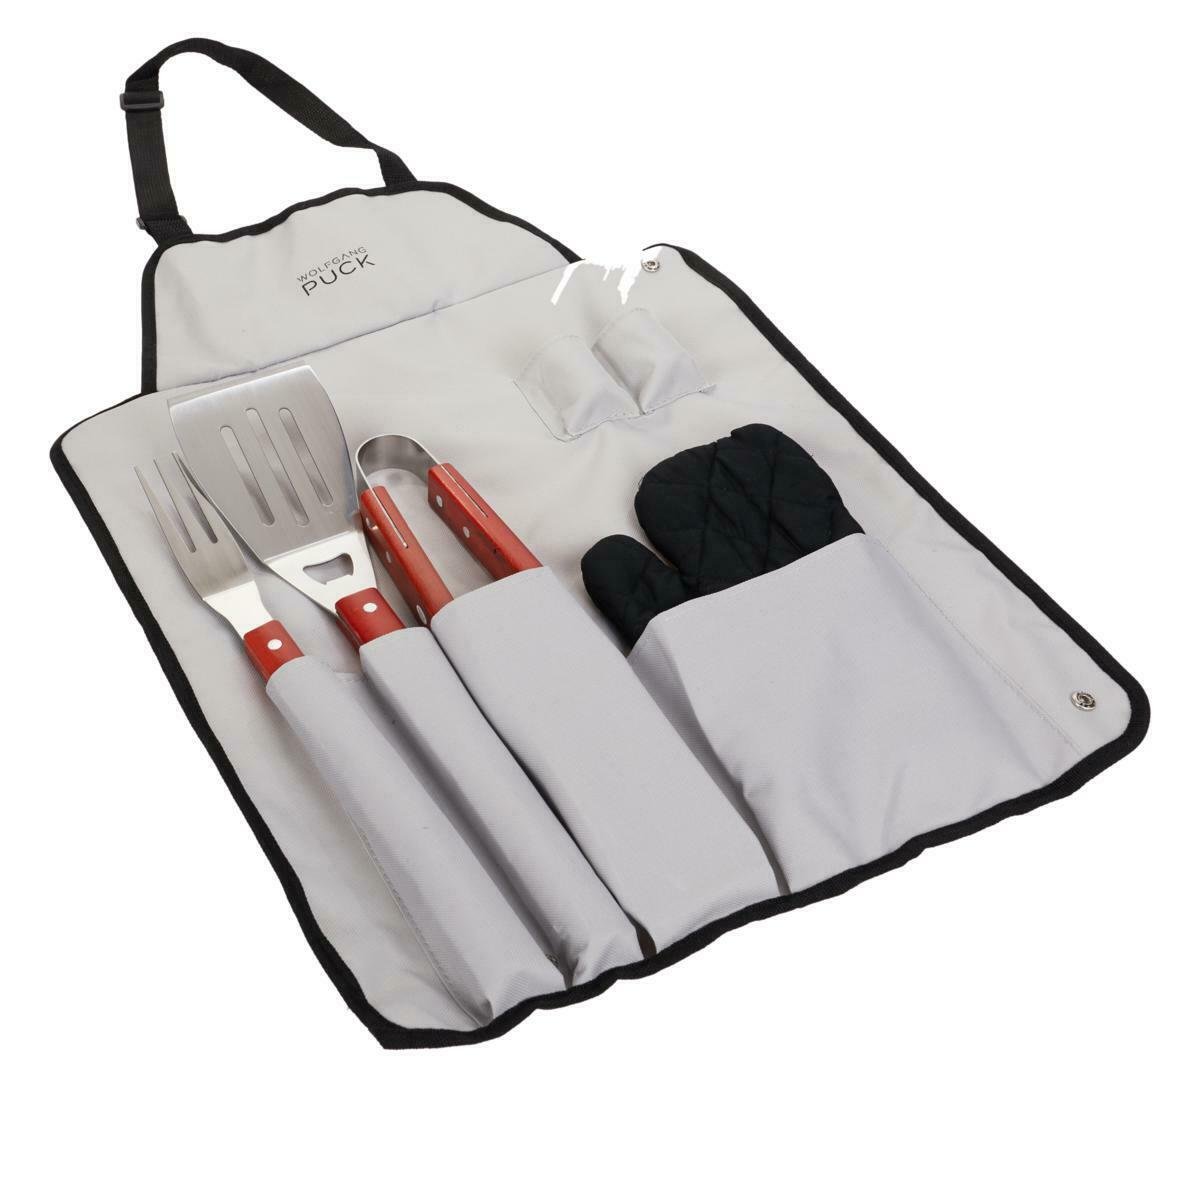 Wolfgang Puck 7-piece BBQ Utensil Set with Apron Model 712-954